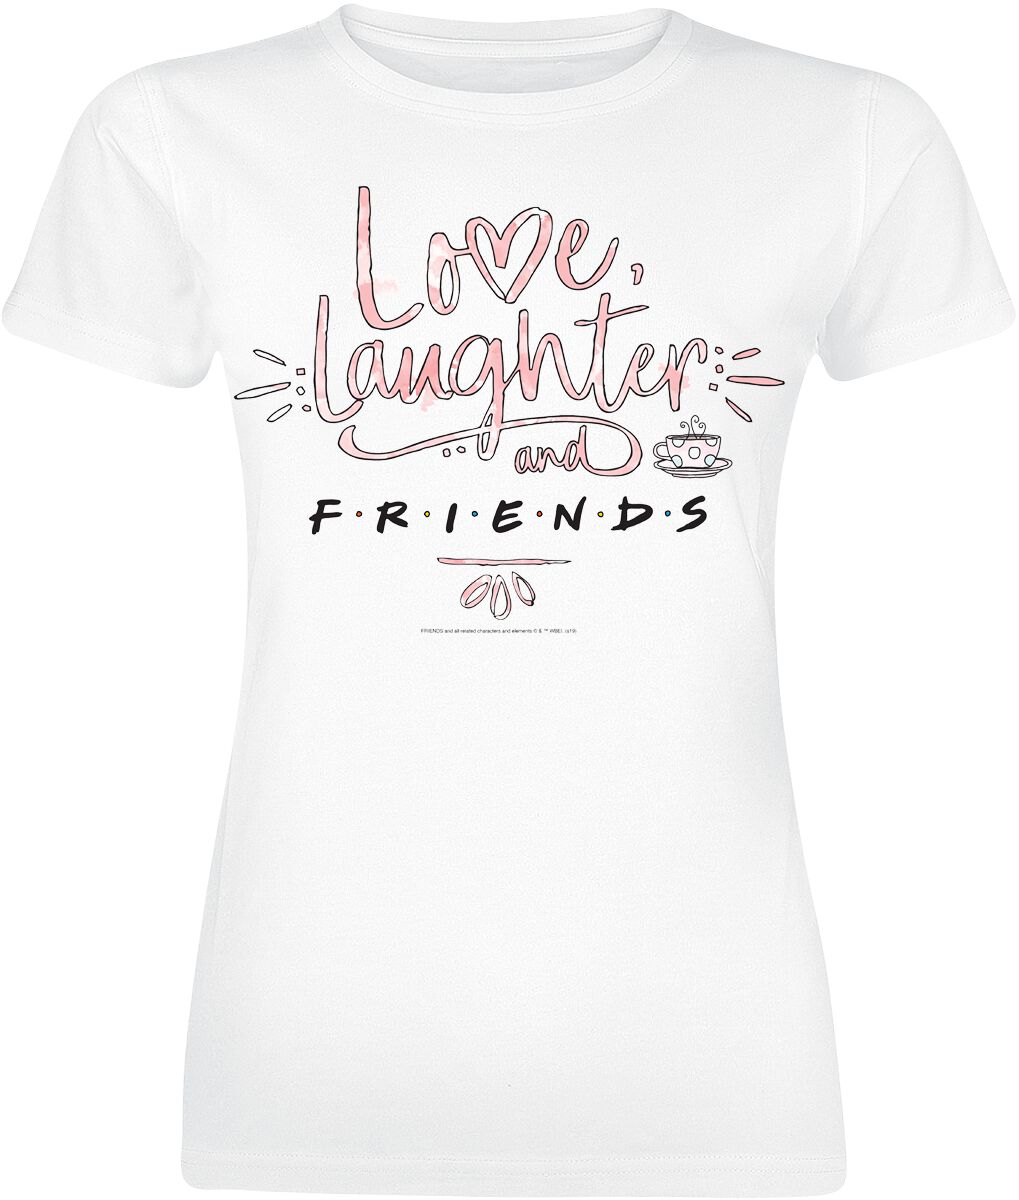 Friends Love Laughter T-Shirt white